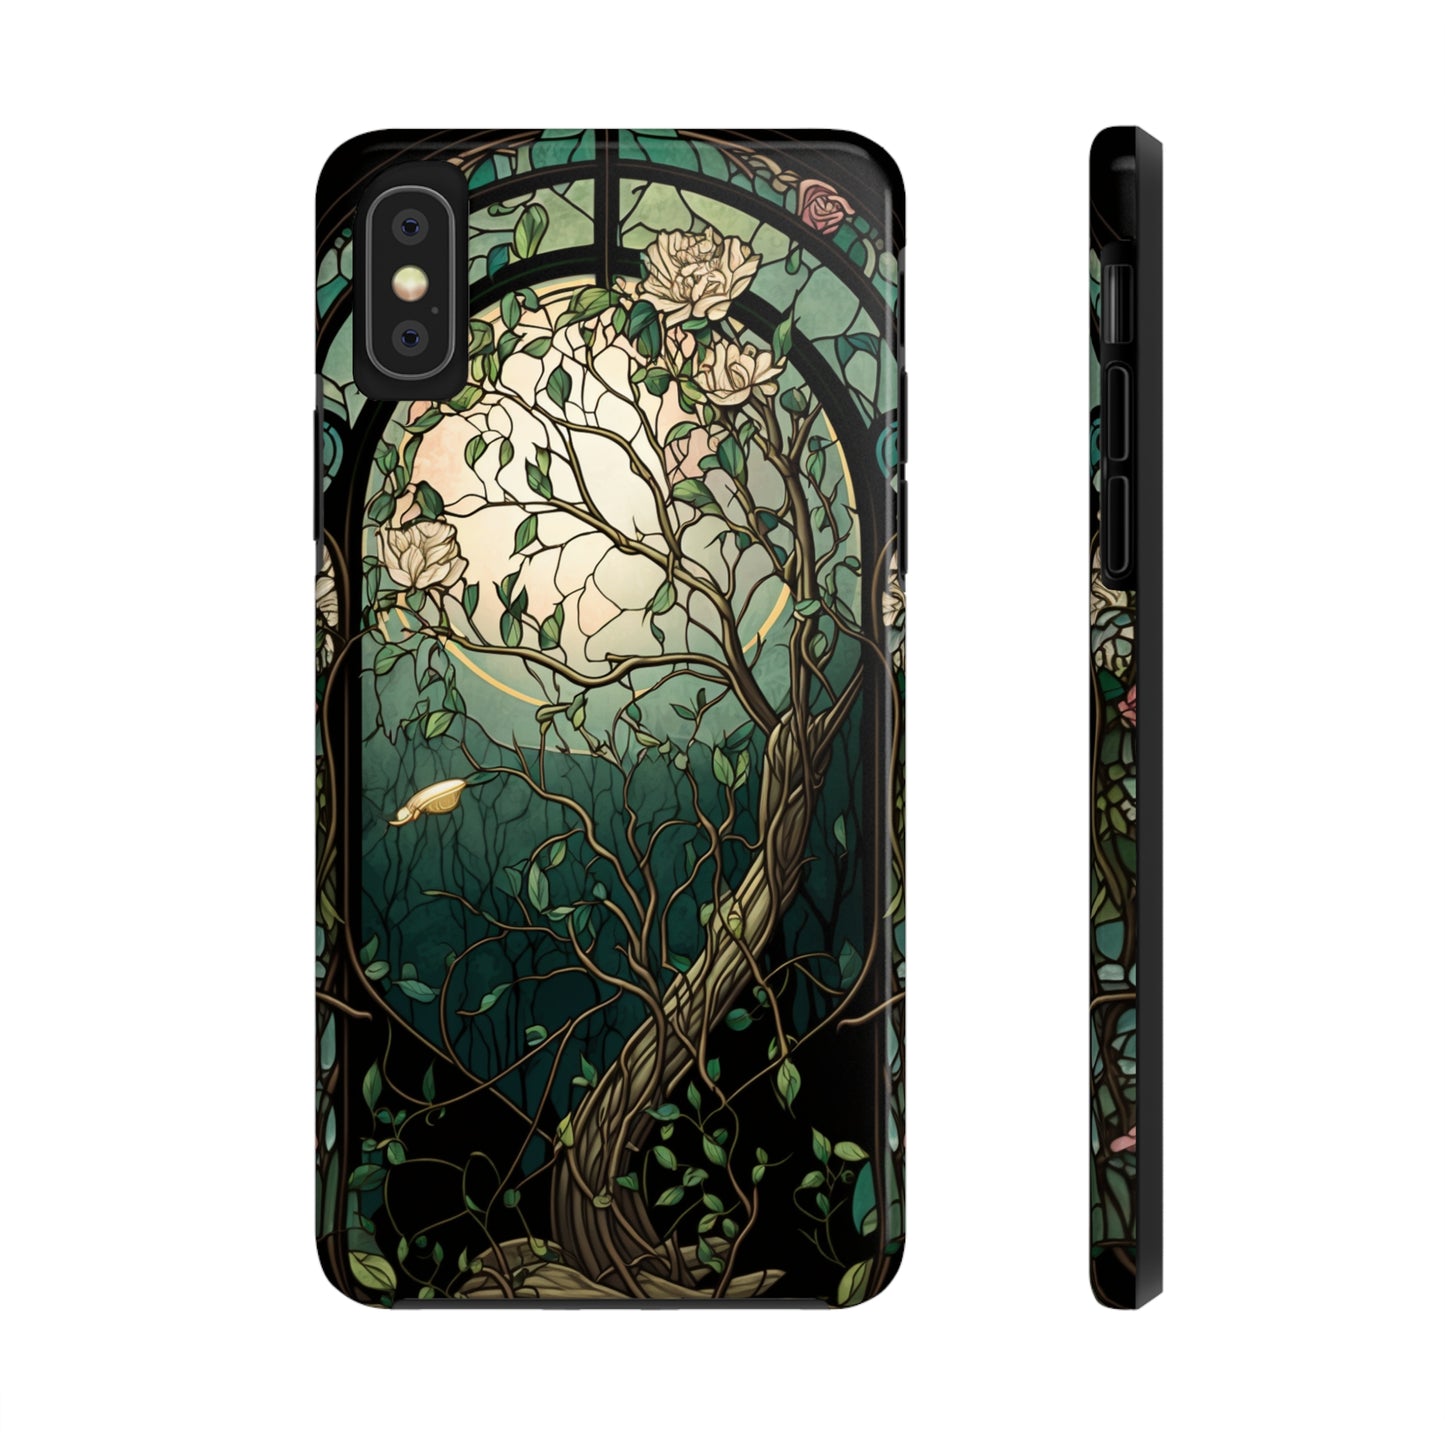 Retro Radiance: Stained Glass Floral Phone Case | Vintage Aesthetic for iPhone Models